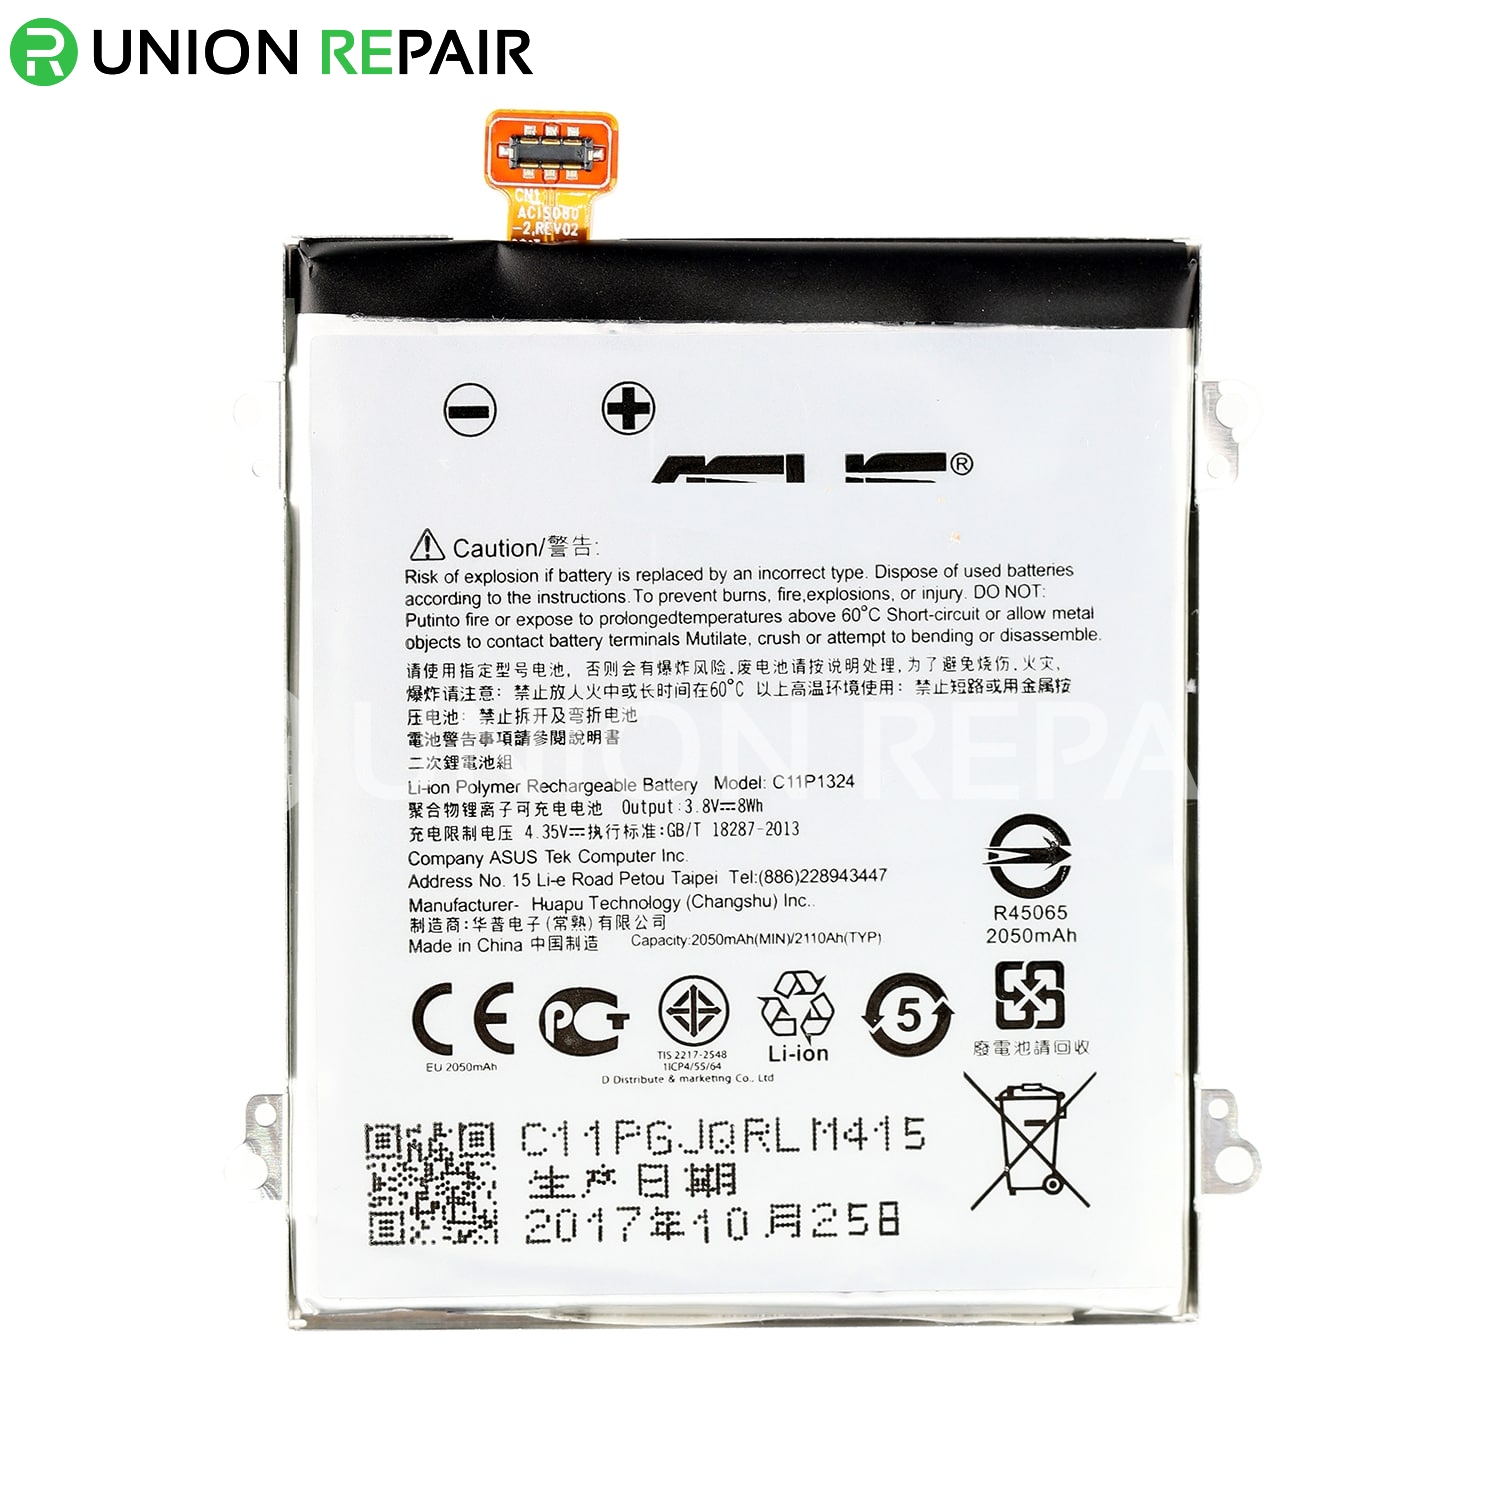 Replacement for Asus Zenfone 5 A500CG Battery (2110 mAh)